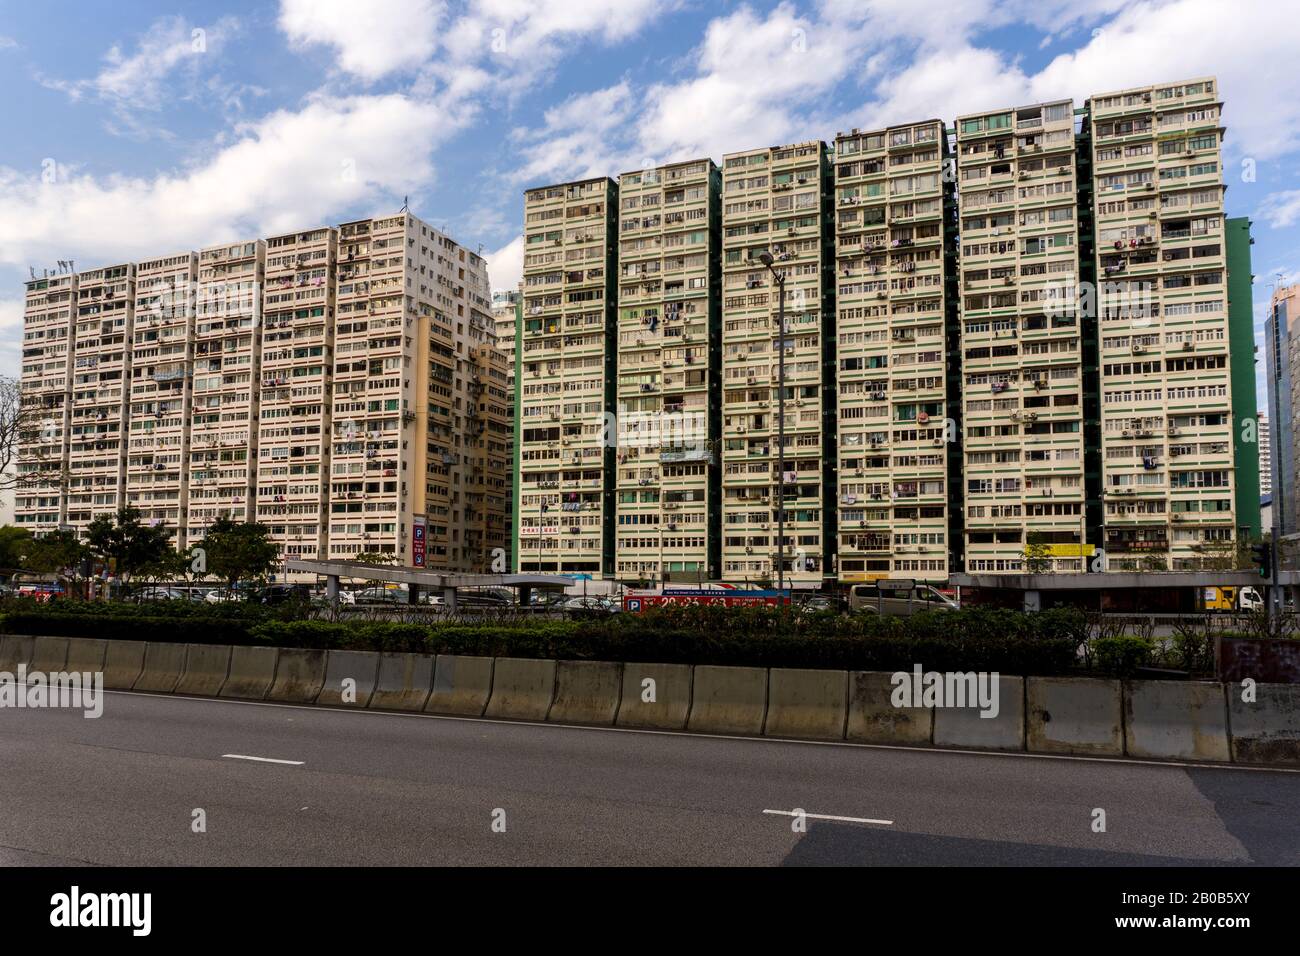 Hong Kong - January 12 2020 : Man Wah Sun Chuen, one of the oldest private housing estates in Hong Kong built in 1960s Stock Photo